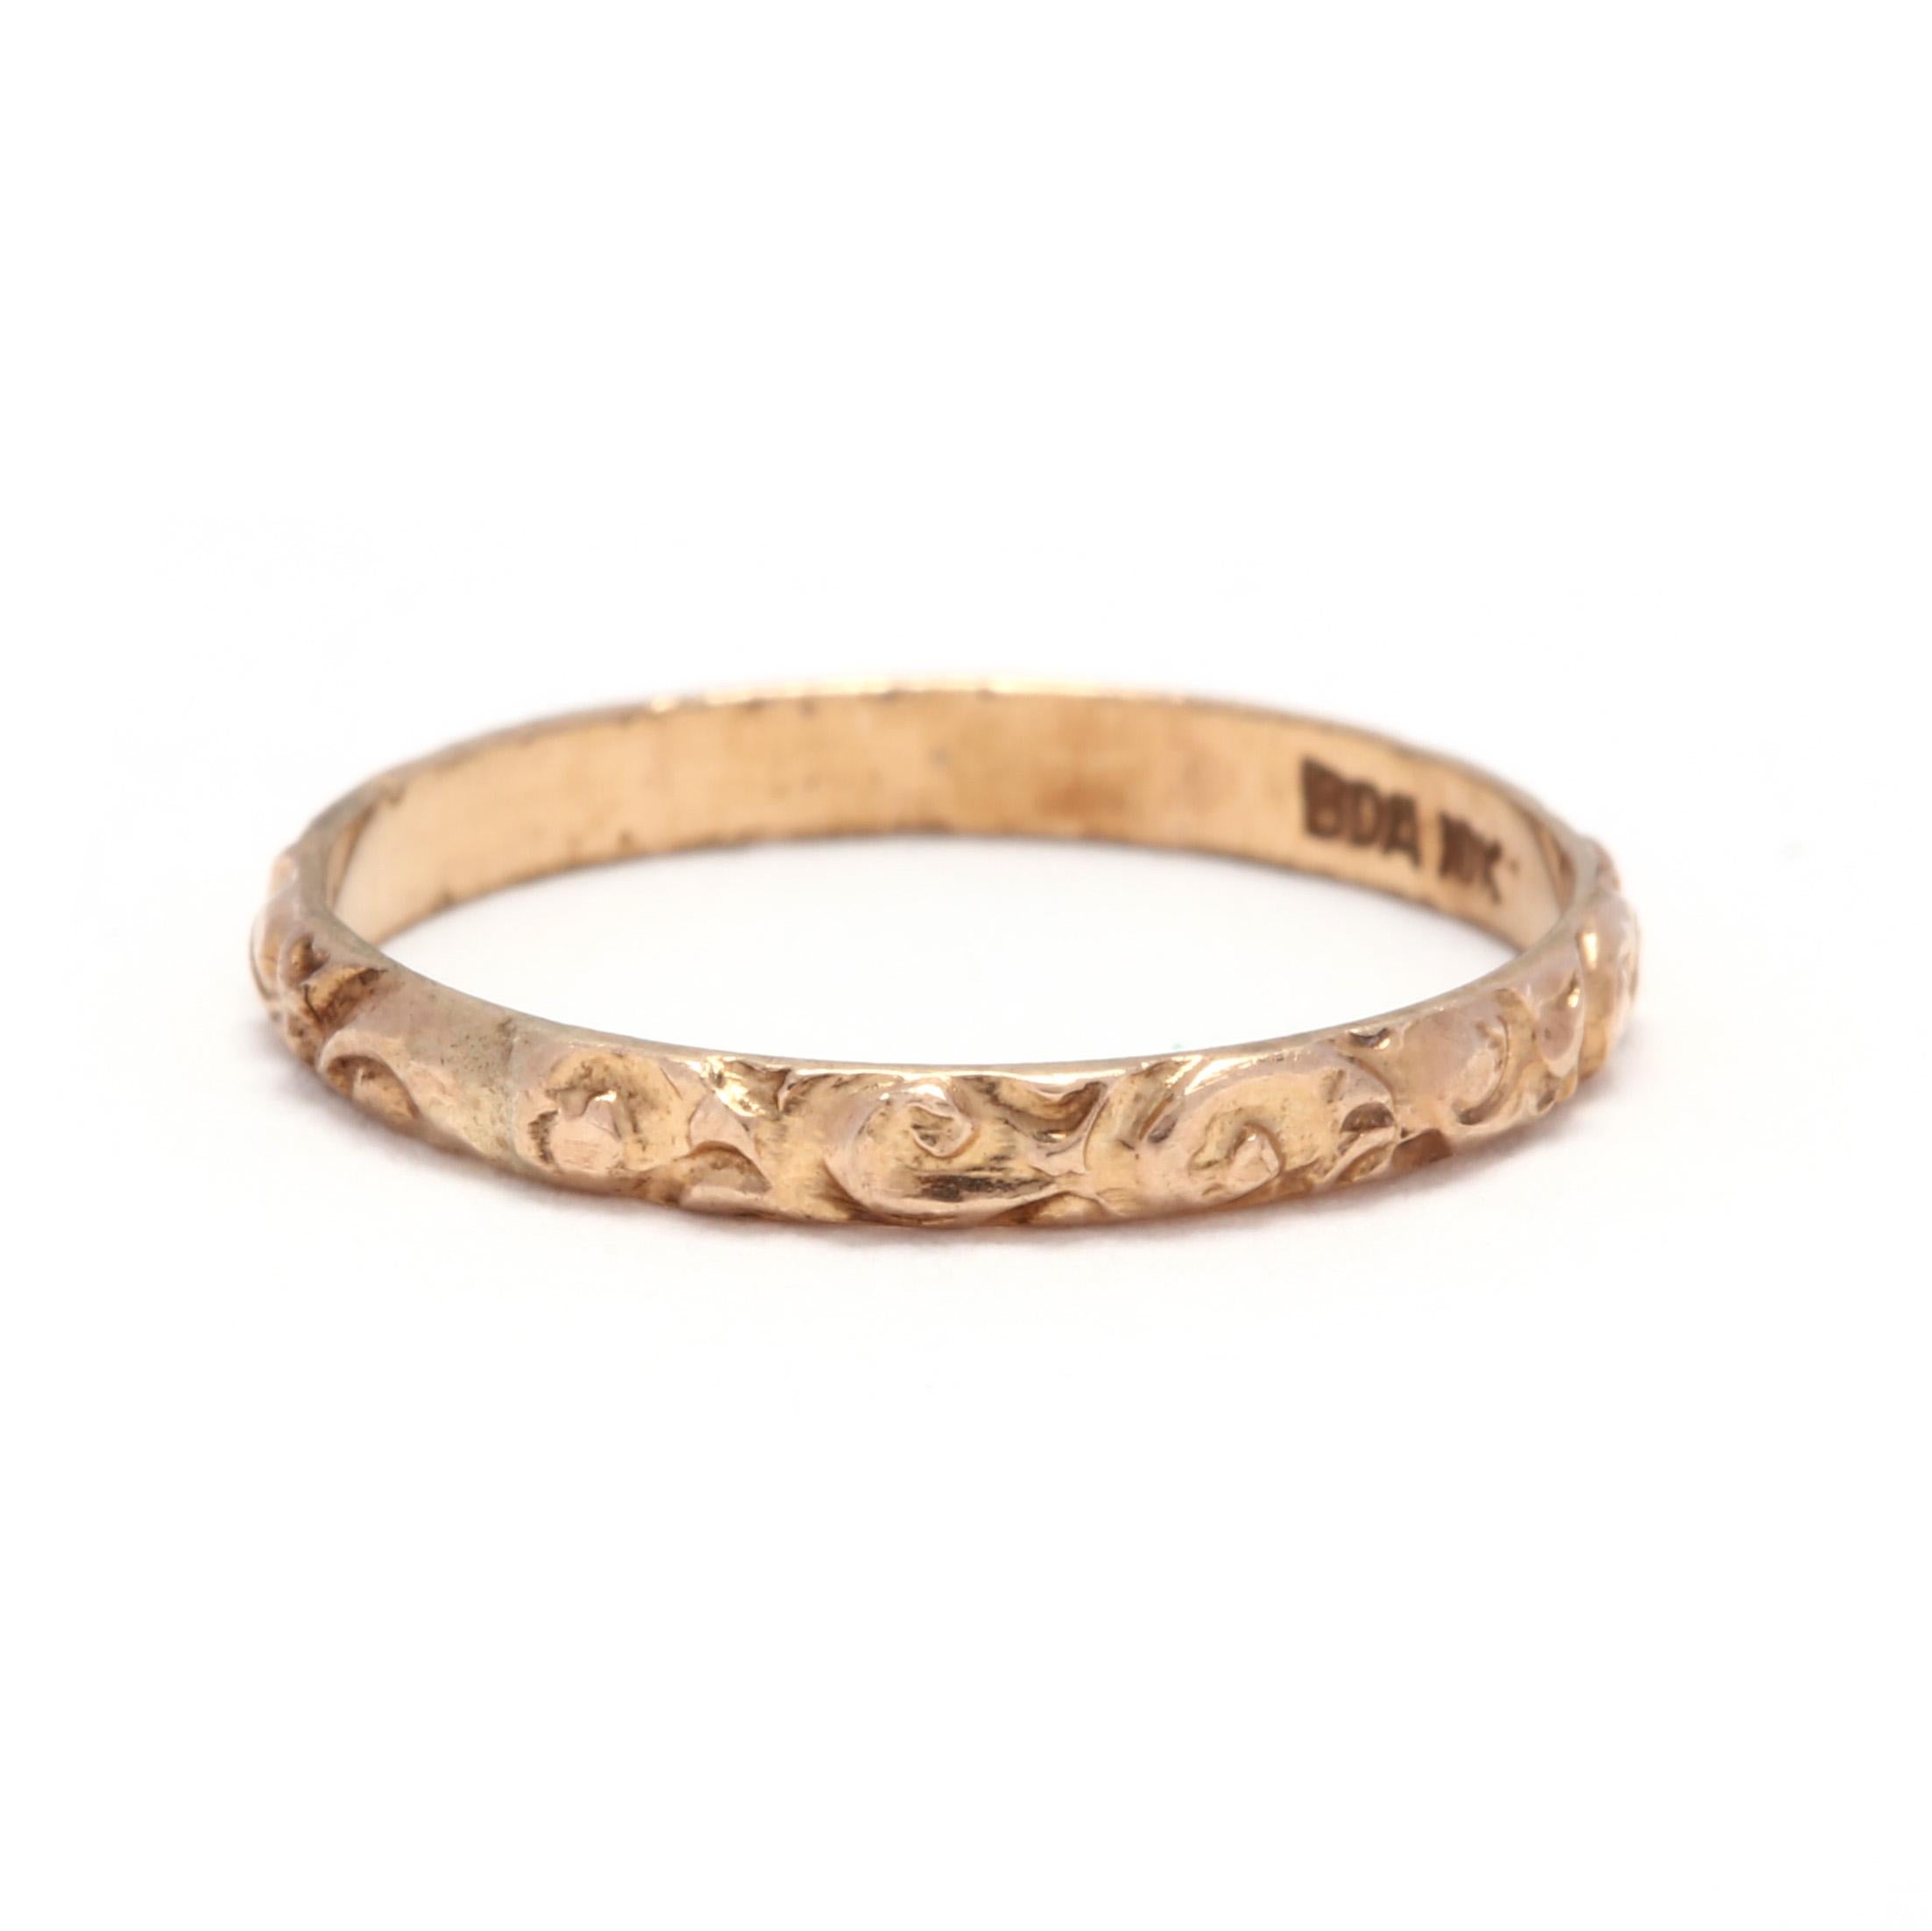 An antique 10 karat yellow gold engraved baby / midi ring. This ring features an eternity design with a floral and swirl motif.

Ring Size 1.5

.29 dwts.

* Please note that this is a vintage item and may show signs of wear. It has been cleaned.

*